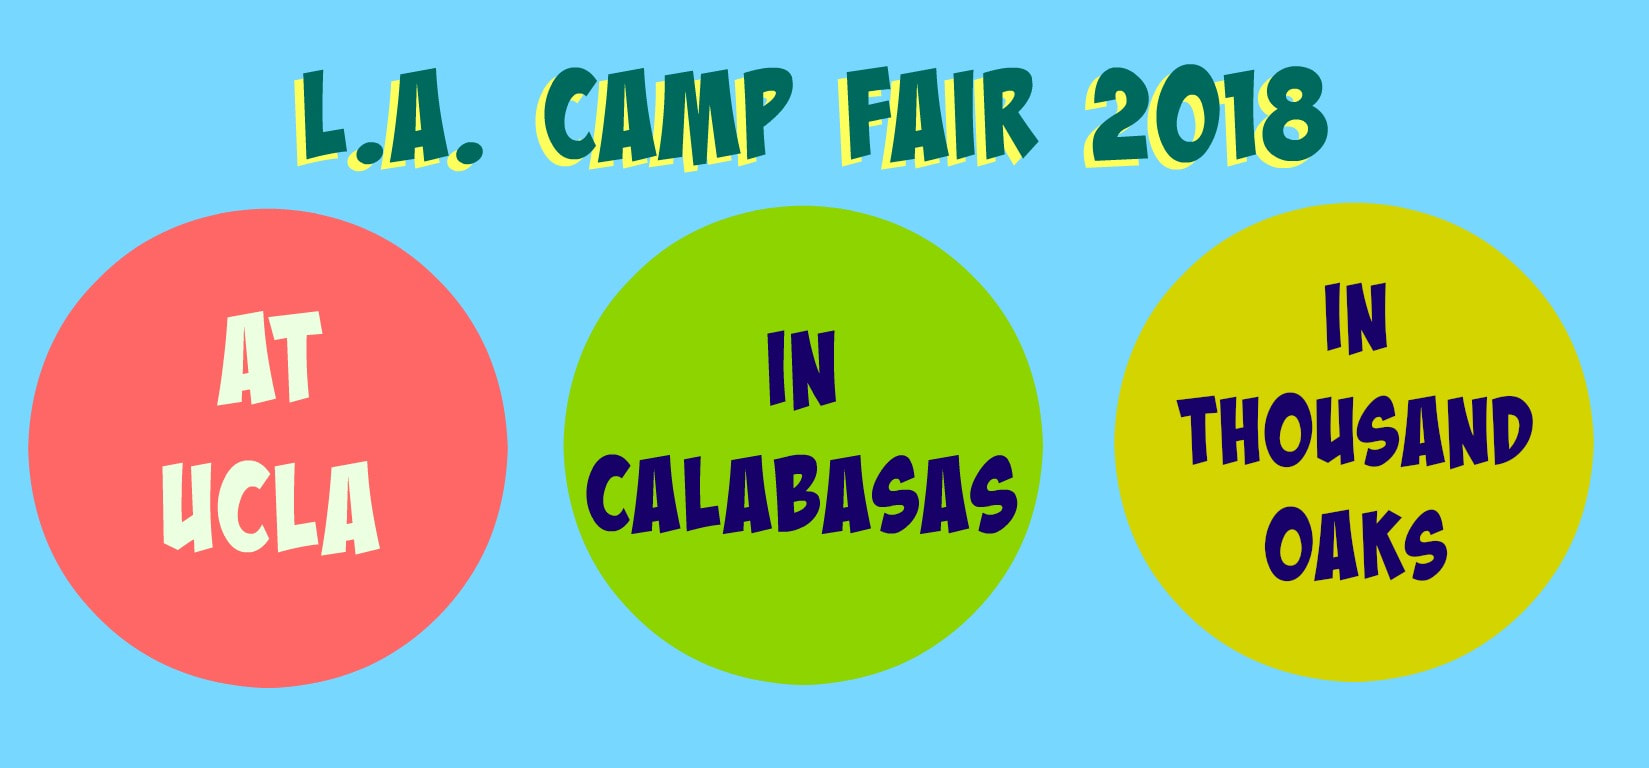 Colorful image promoting L.A. Camp Fair 2018's three summer camp expo event locations at UCLA, in Thousand Oaks, and in Calabasas.